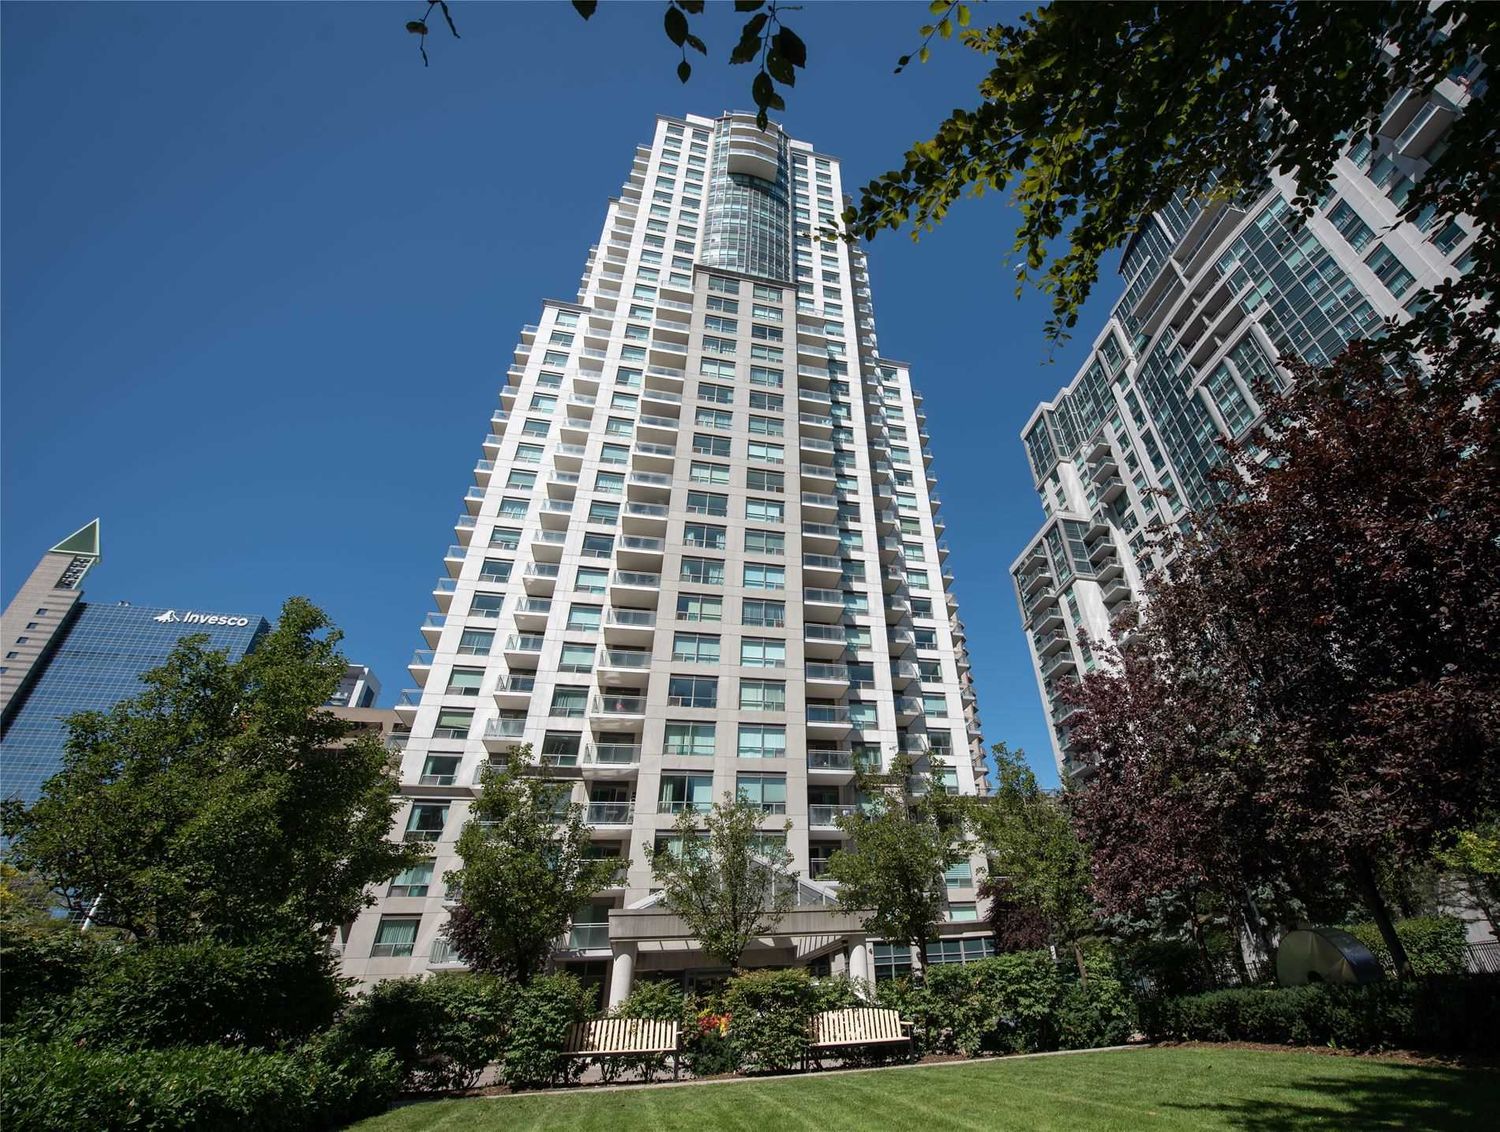 21 Hillcrest Avenue. 21 Hillcrest Condos is located in  North York, Toronto - image #1 of 2